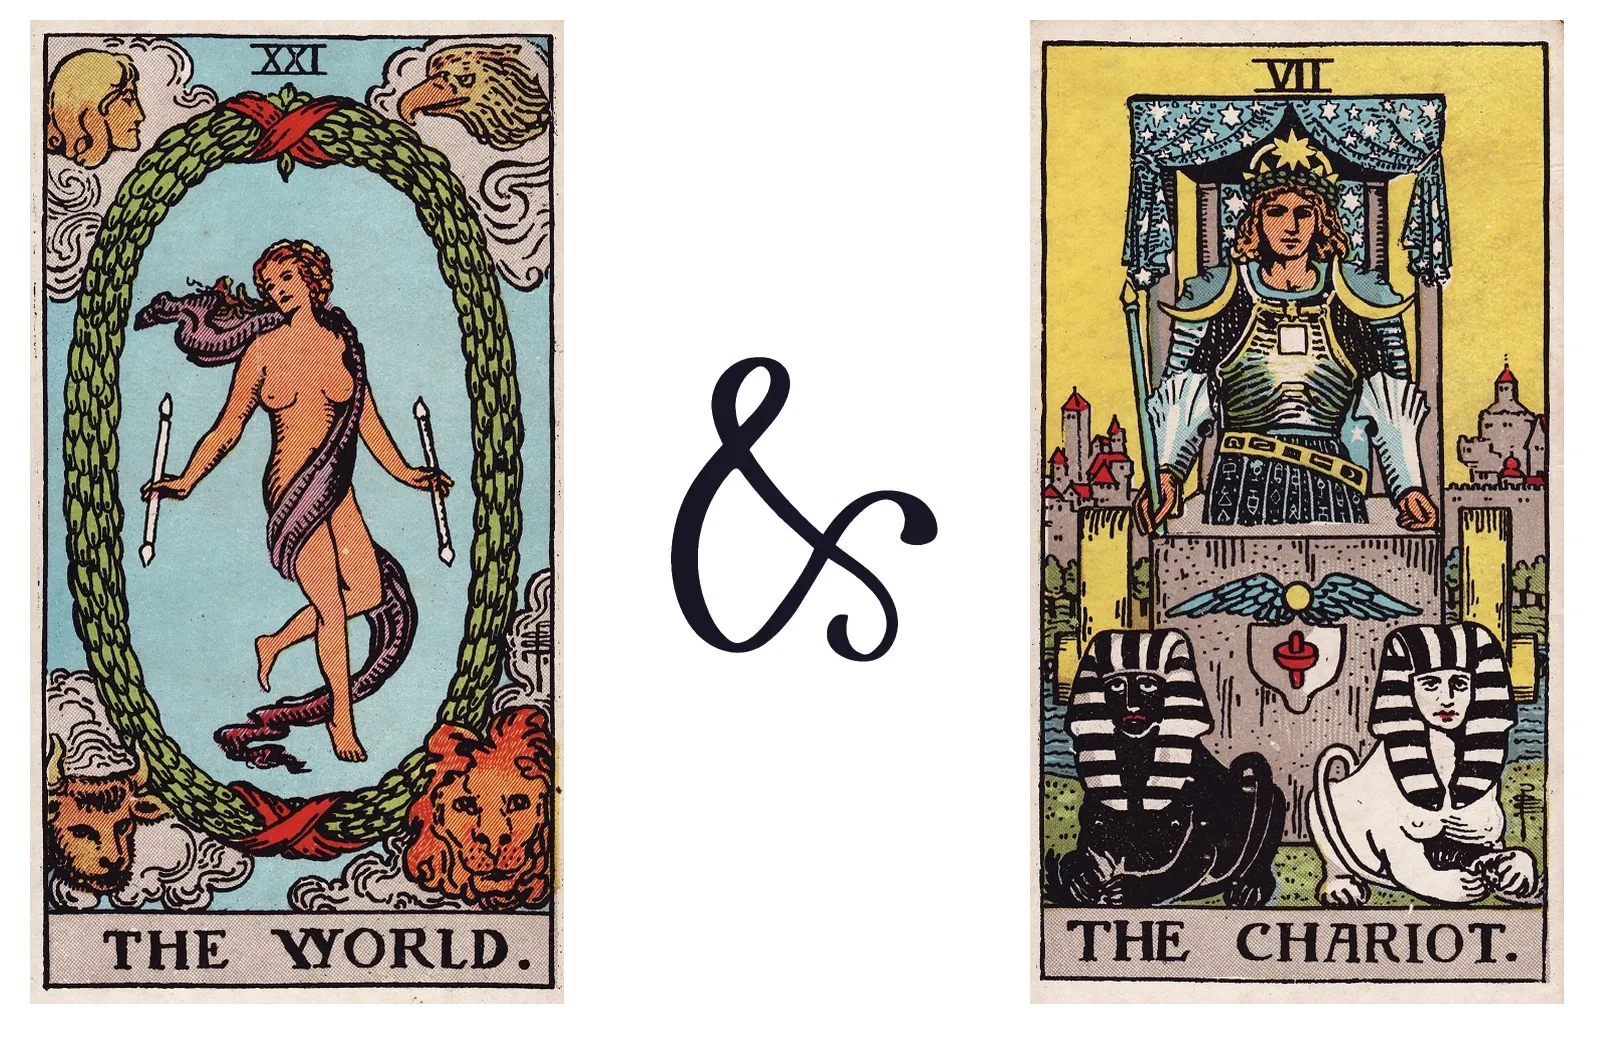 The World and The Chariot